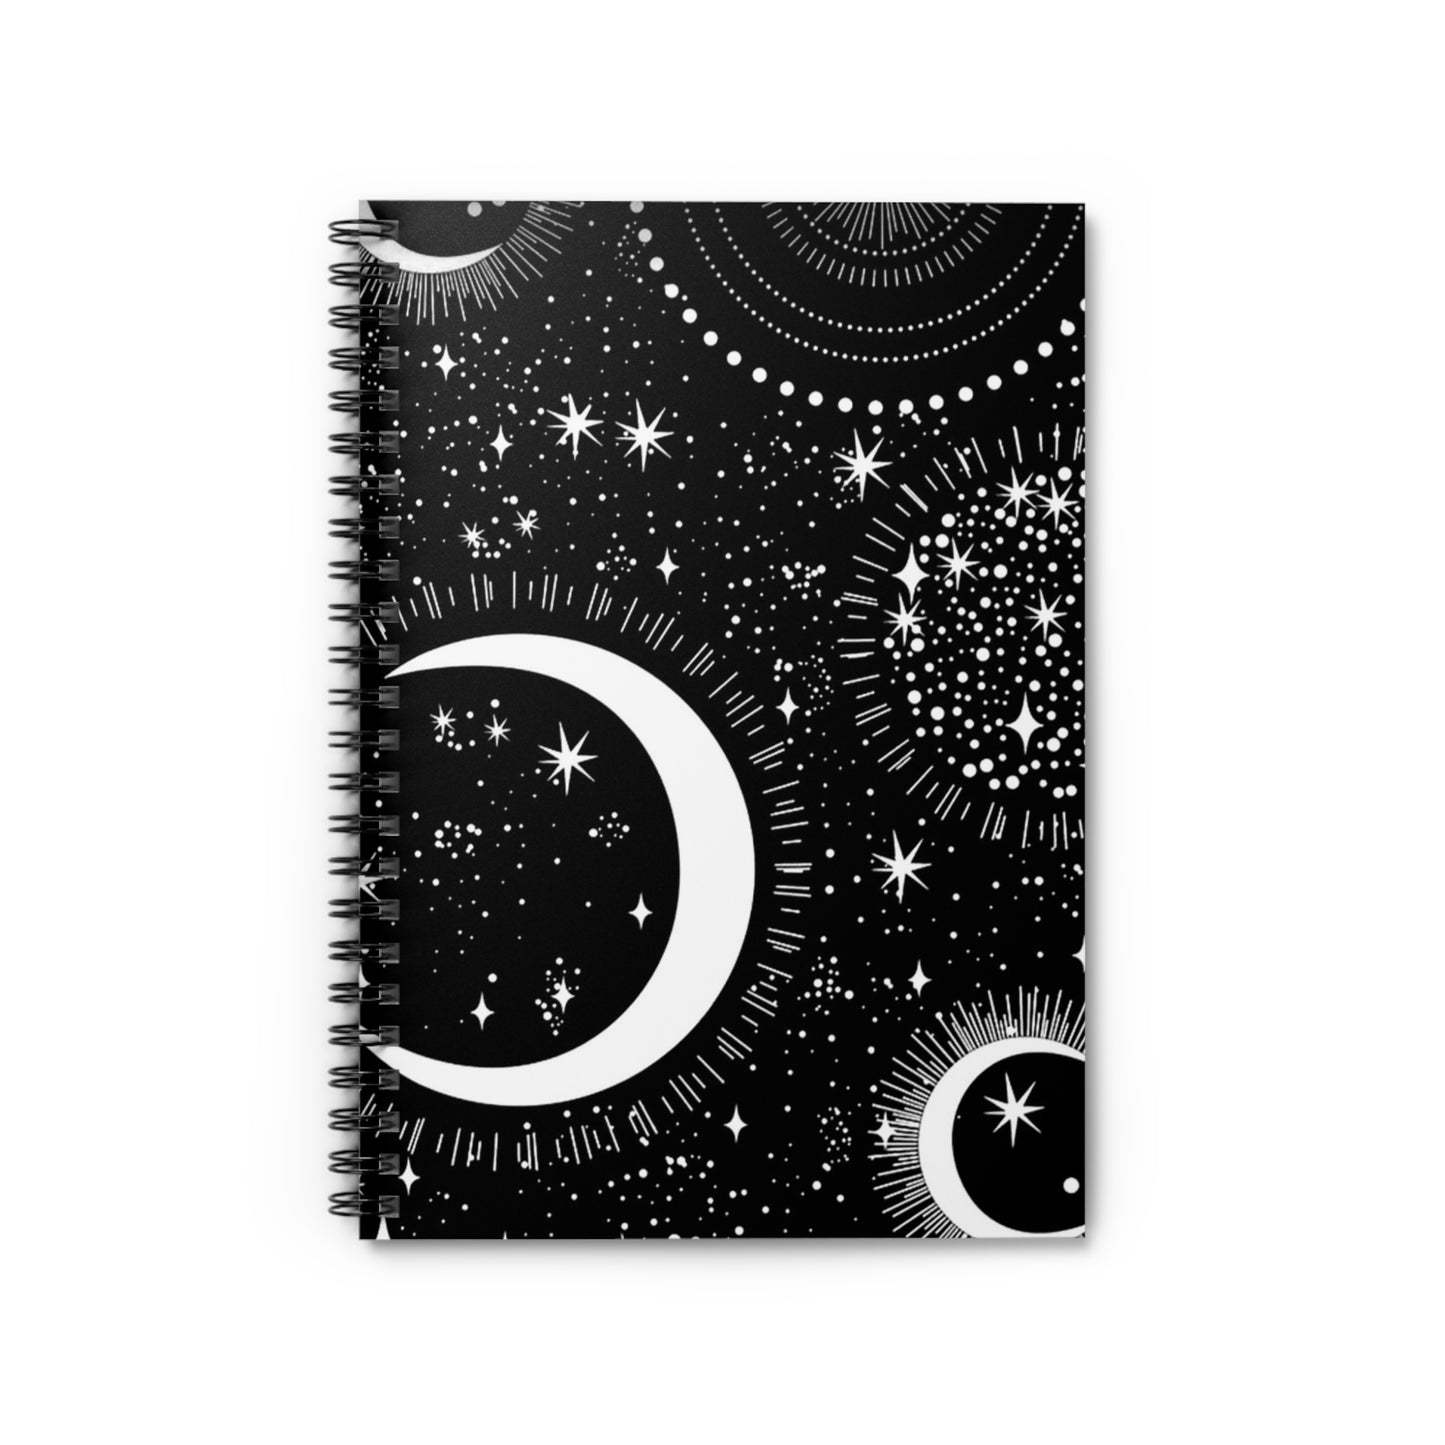 Moons and Stars Journal Spiral Notebook - Ruled Line